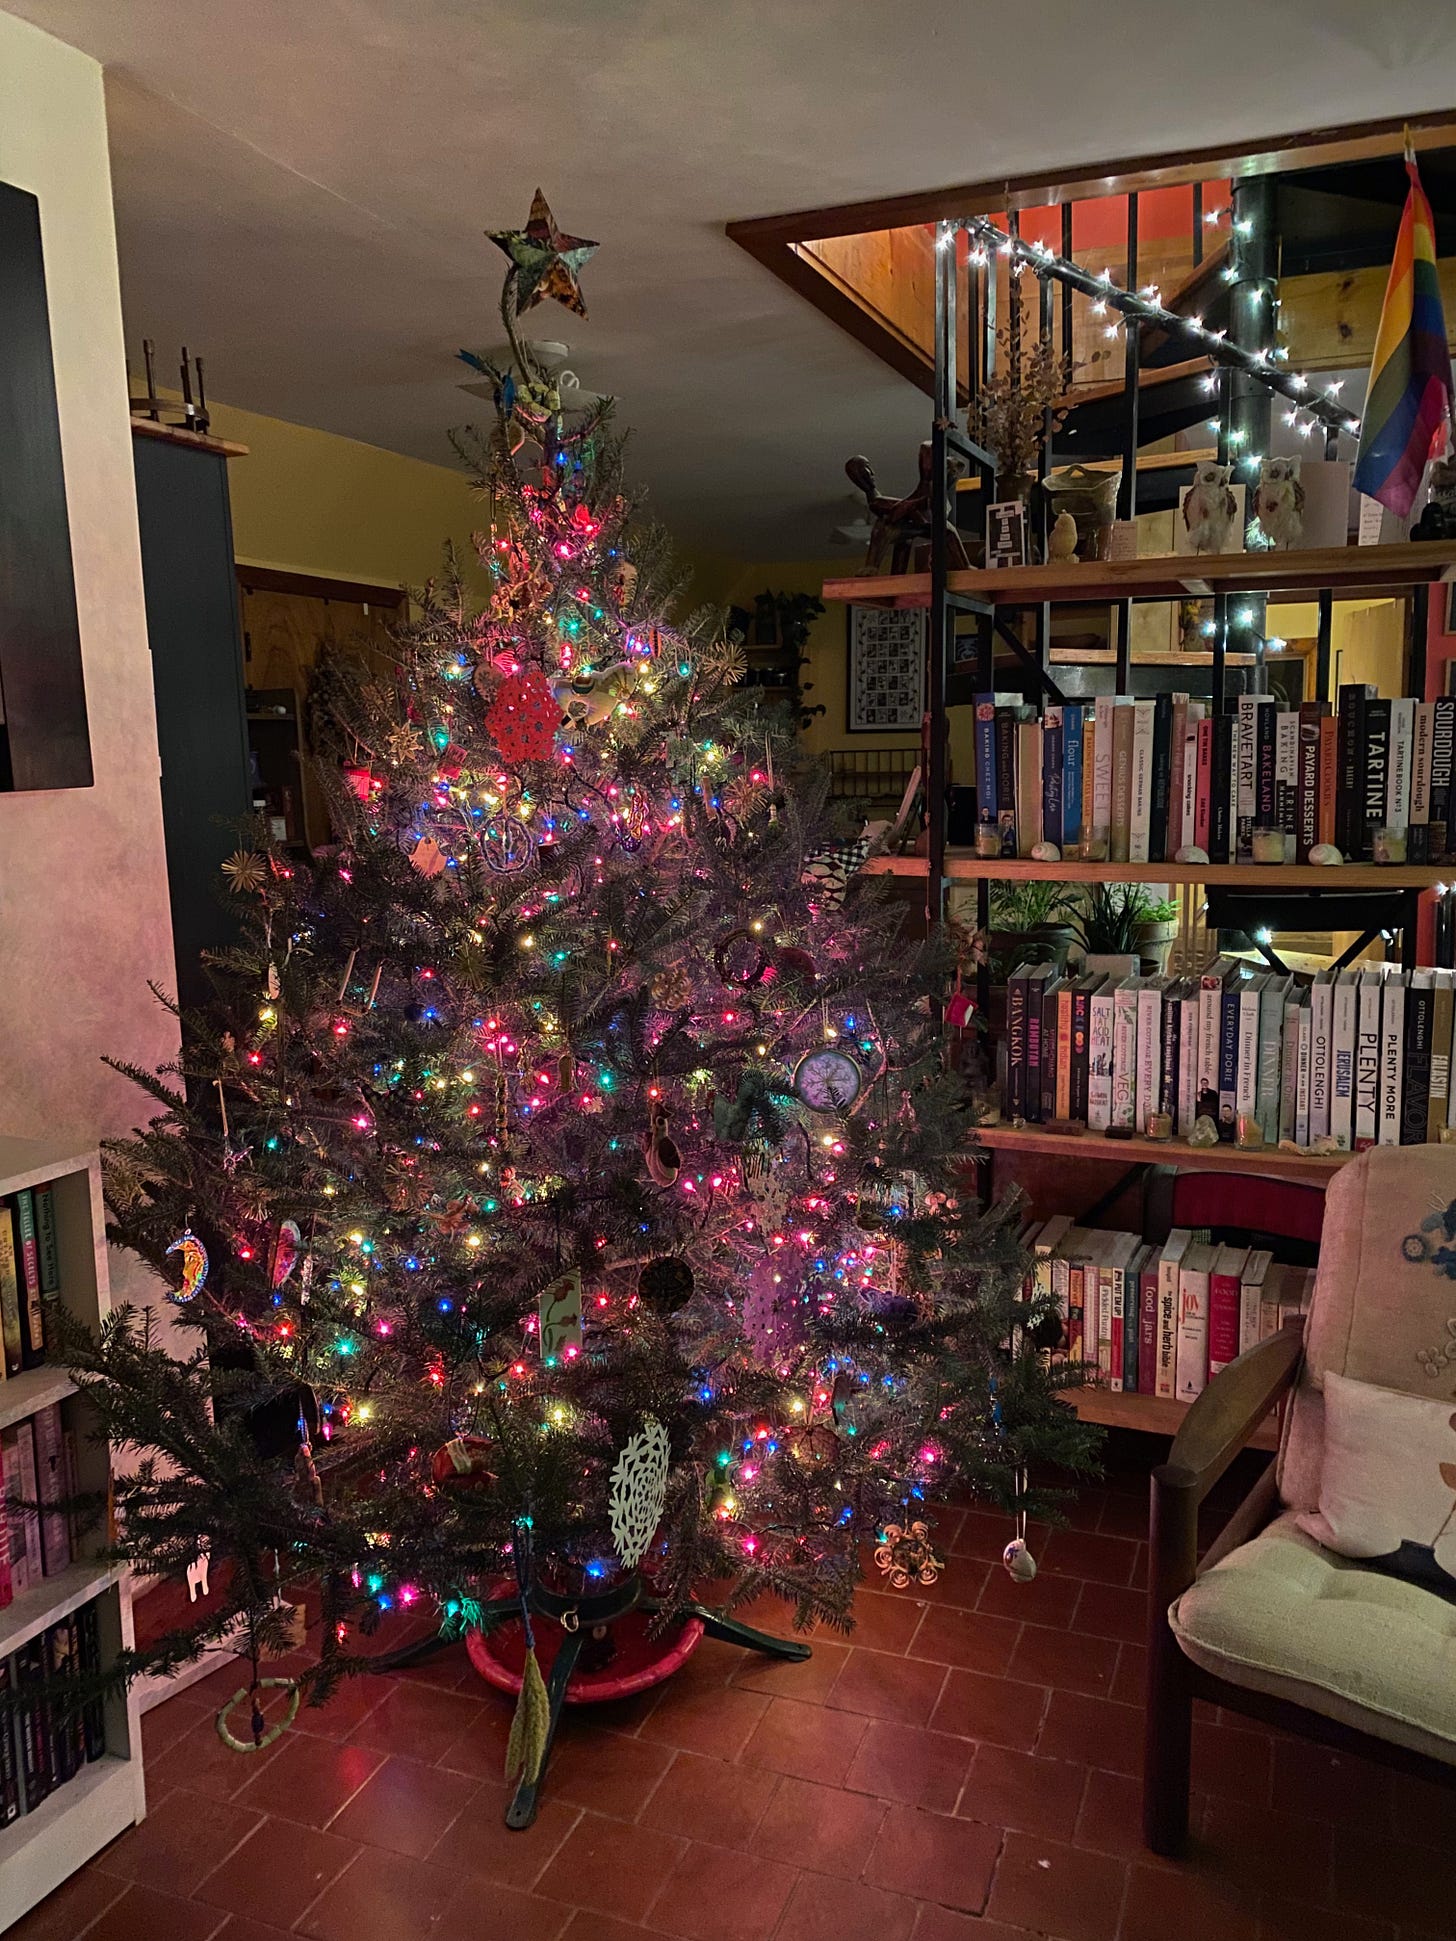 A Christmas tree full of lights and ornaments next to a colorful bookcase.